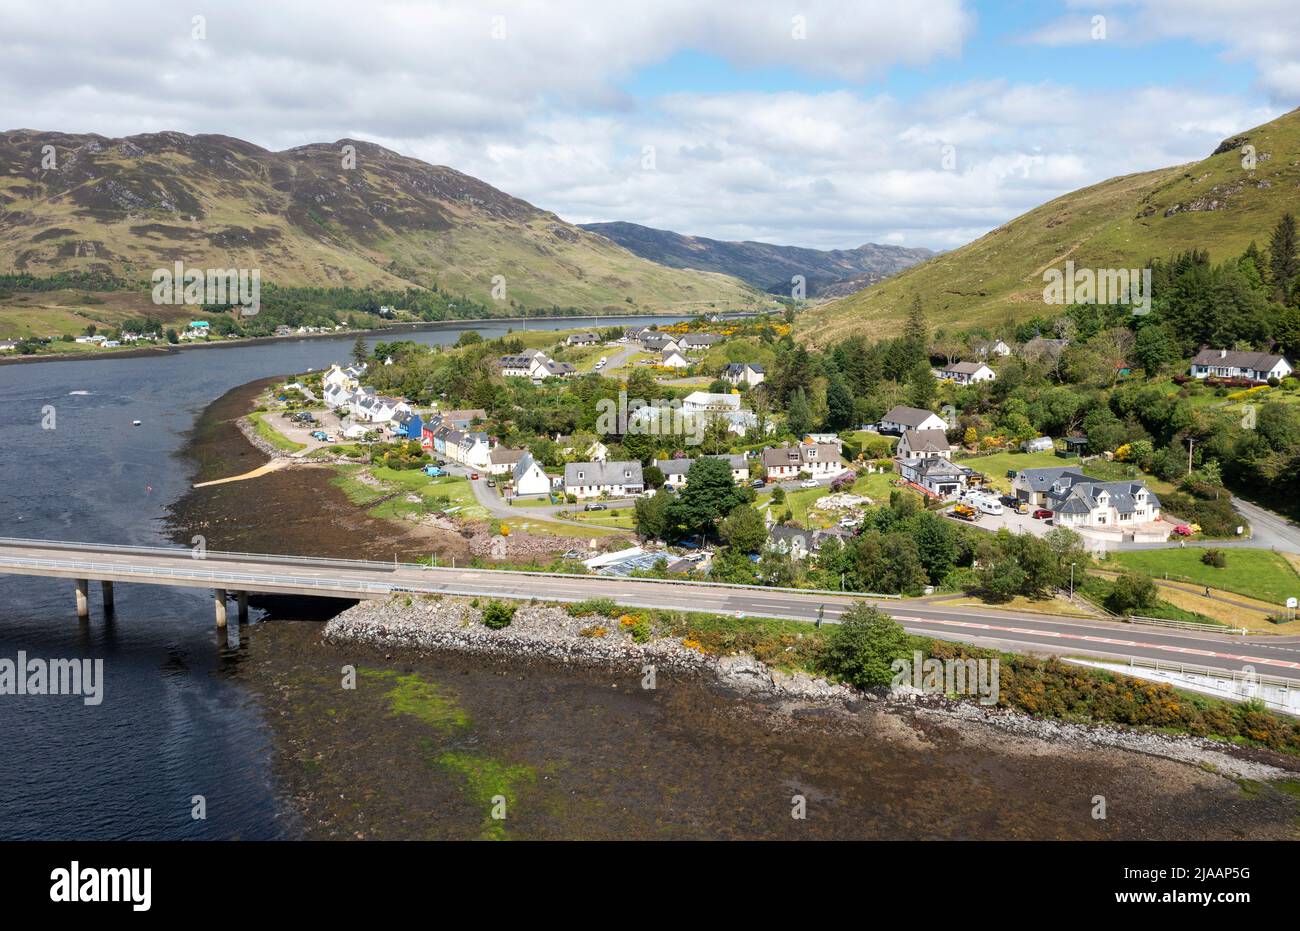 Aerial view of the A 87 road and Dornie village, Ross-shire, the main road to Kyle of Lochalsh and the Isle of Skye. Stock Photo